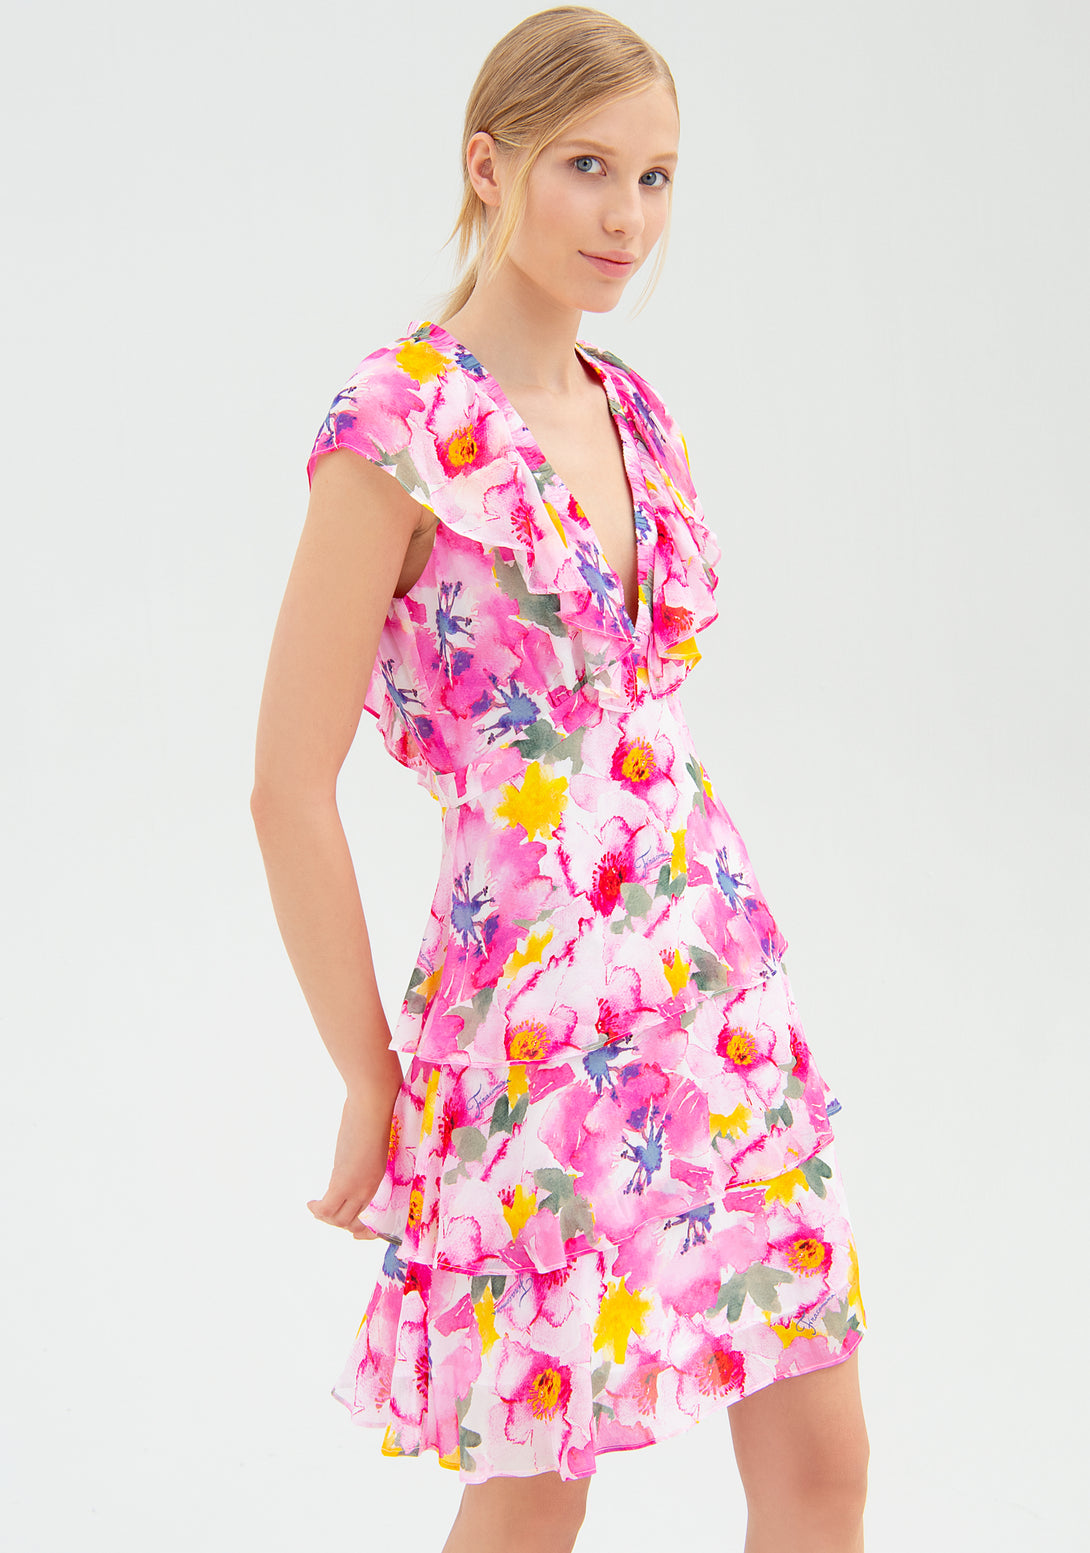 Mini dress with flowery pattern and no sleeves